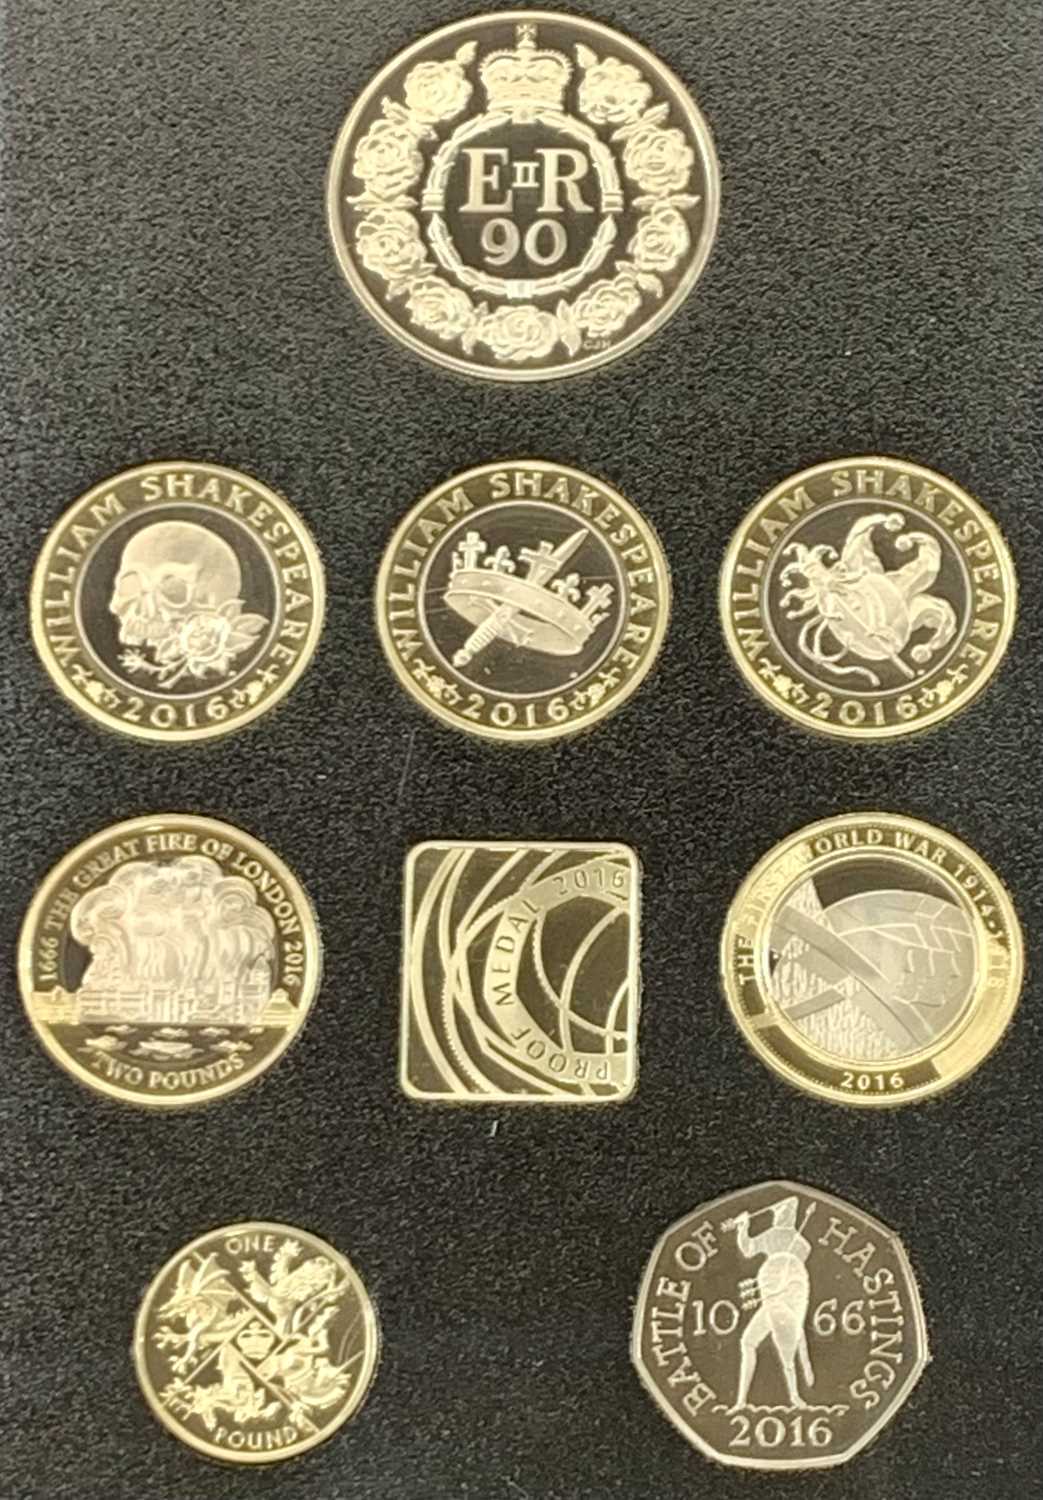 ROYAL MINT ANNUAL & PROOF COIN SETS x 5, 2013 set of 15 coins, 2014 set of 14 coins, 2015 set of - Image 2 of 7